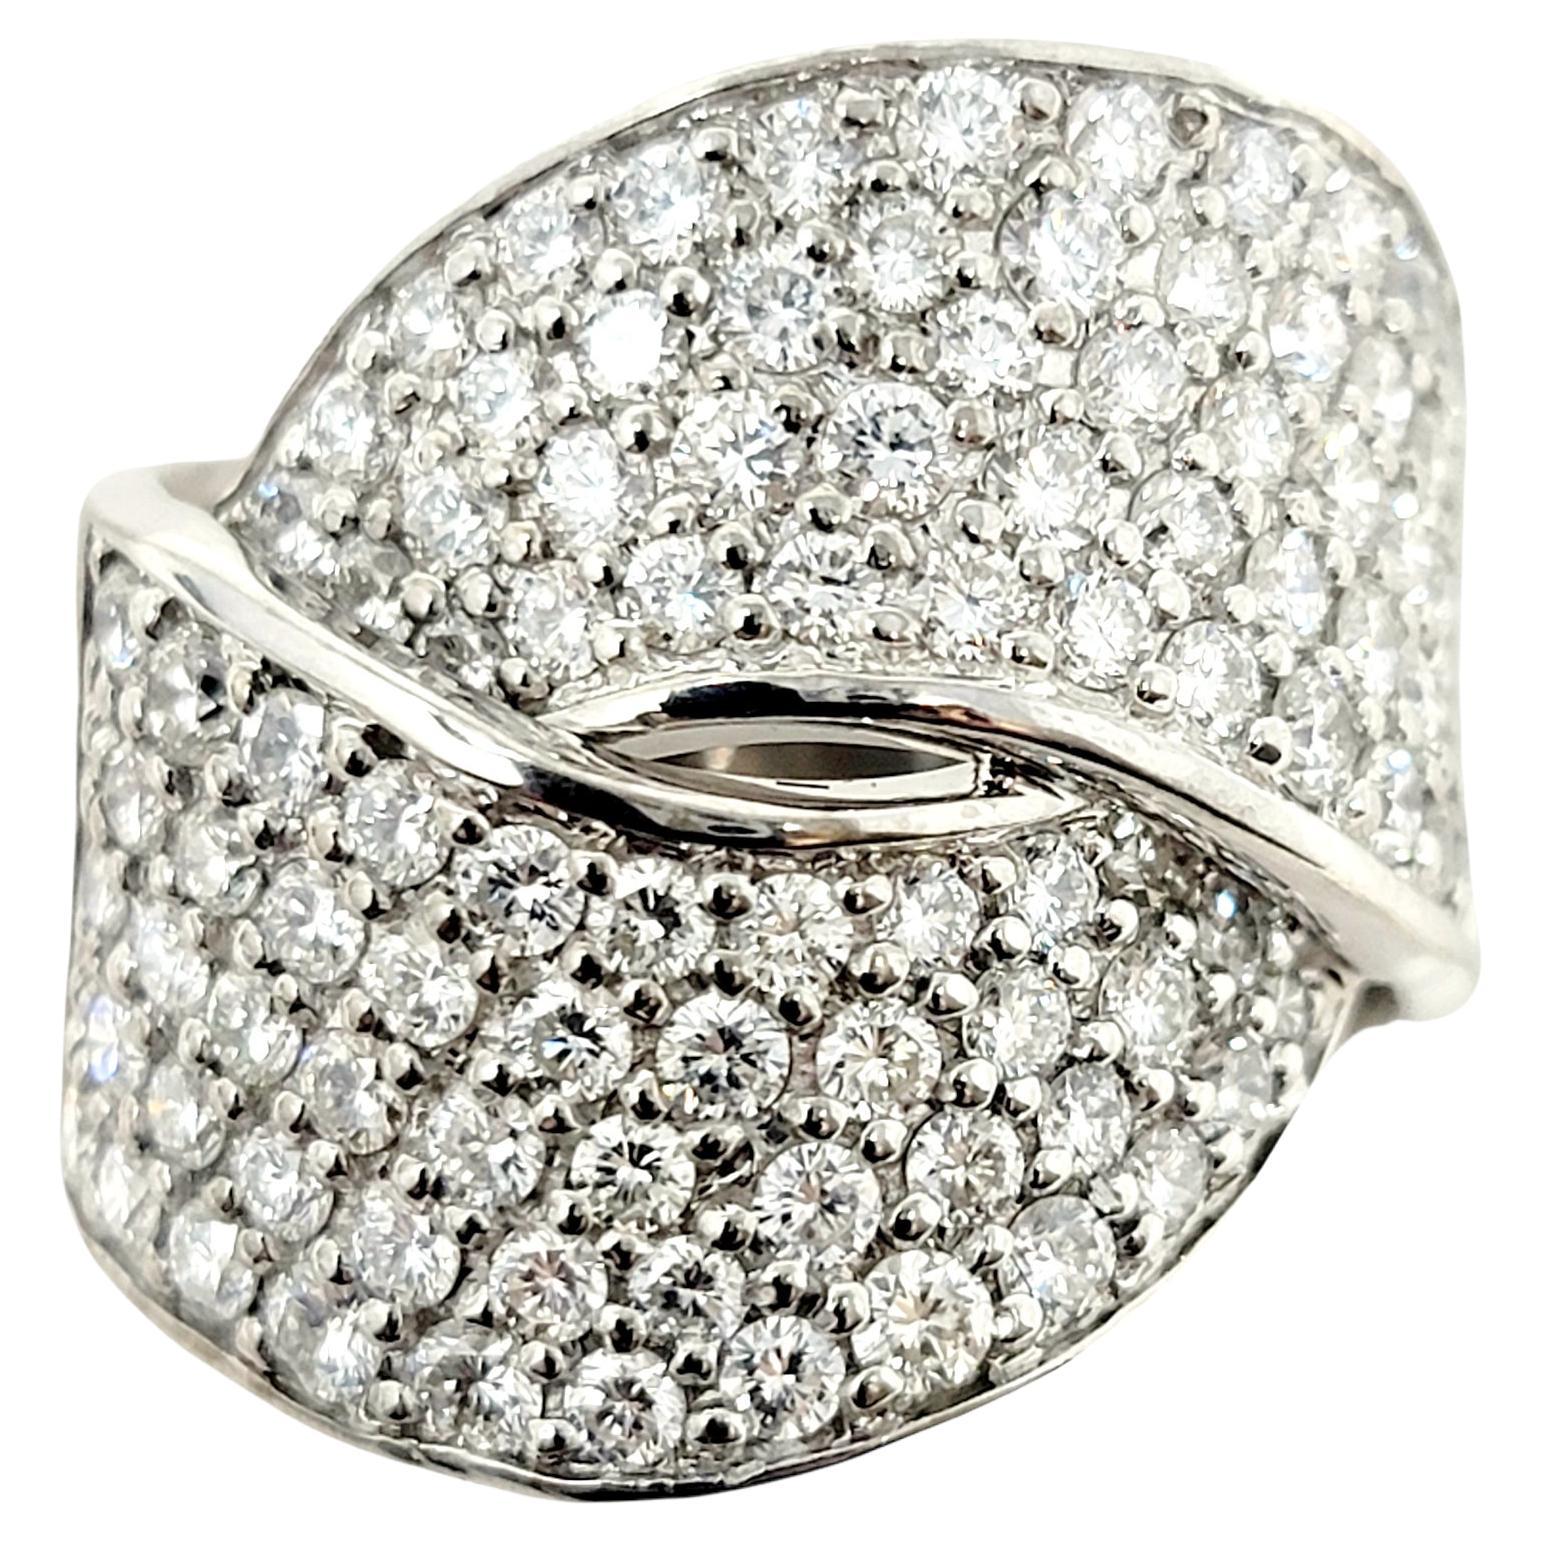 Ring size: 7.5

This stunning diamond cocktail ring wraps elegantly around the finger and fills it with sparkle from end to end. Featuring a contemporary wrap style design, the wide overlapping bands are embellished with icy white pave diamonds. The